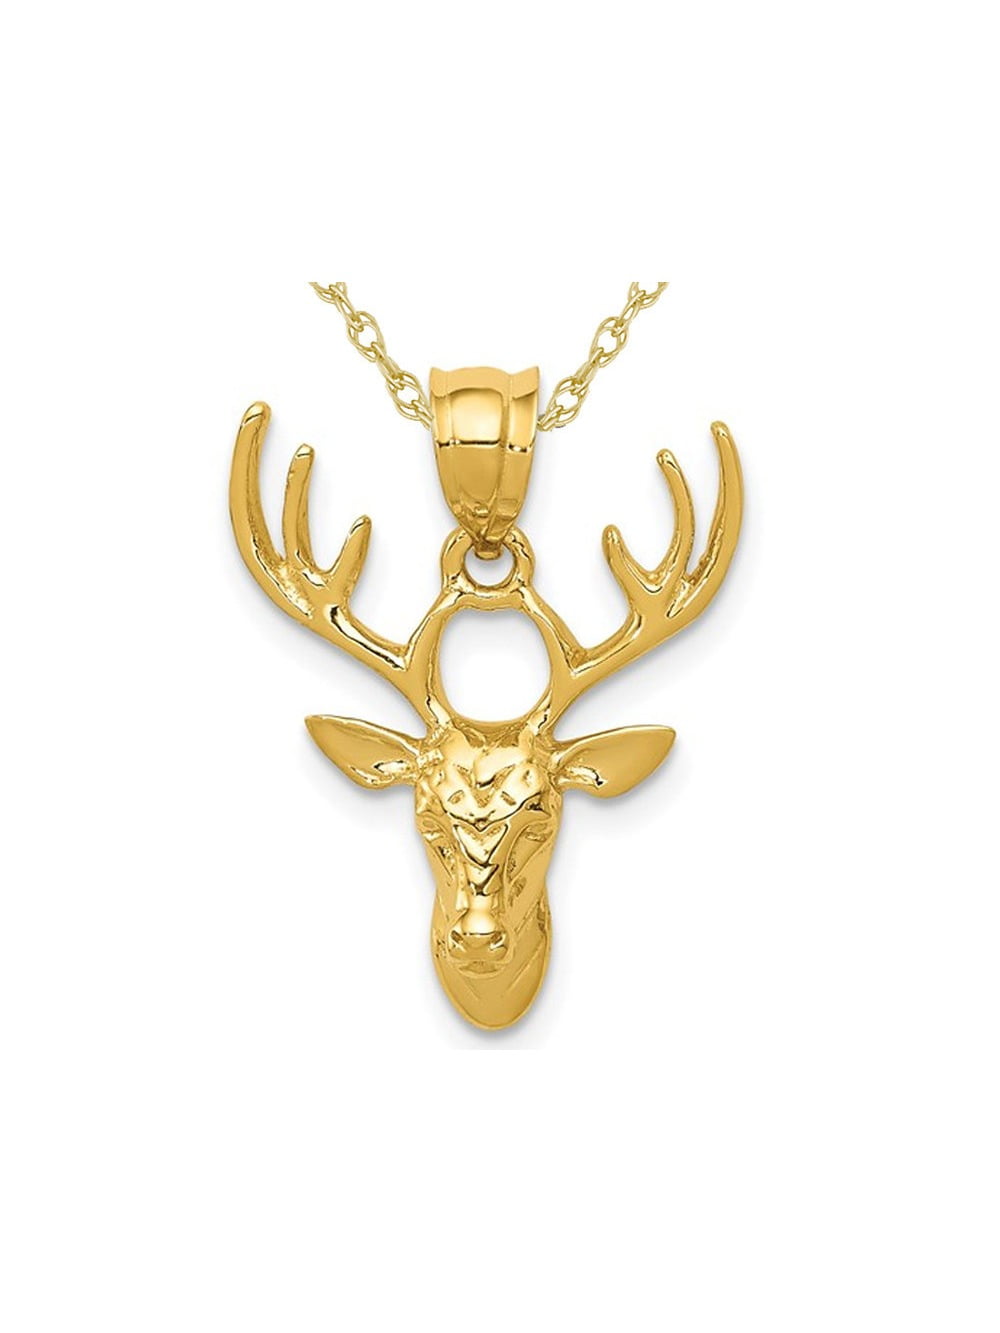 14K Yellow Gold Deer Head Buck Pendant Necklace with Chain